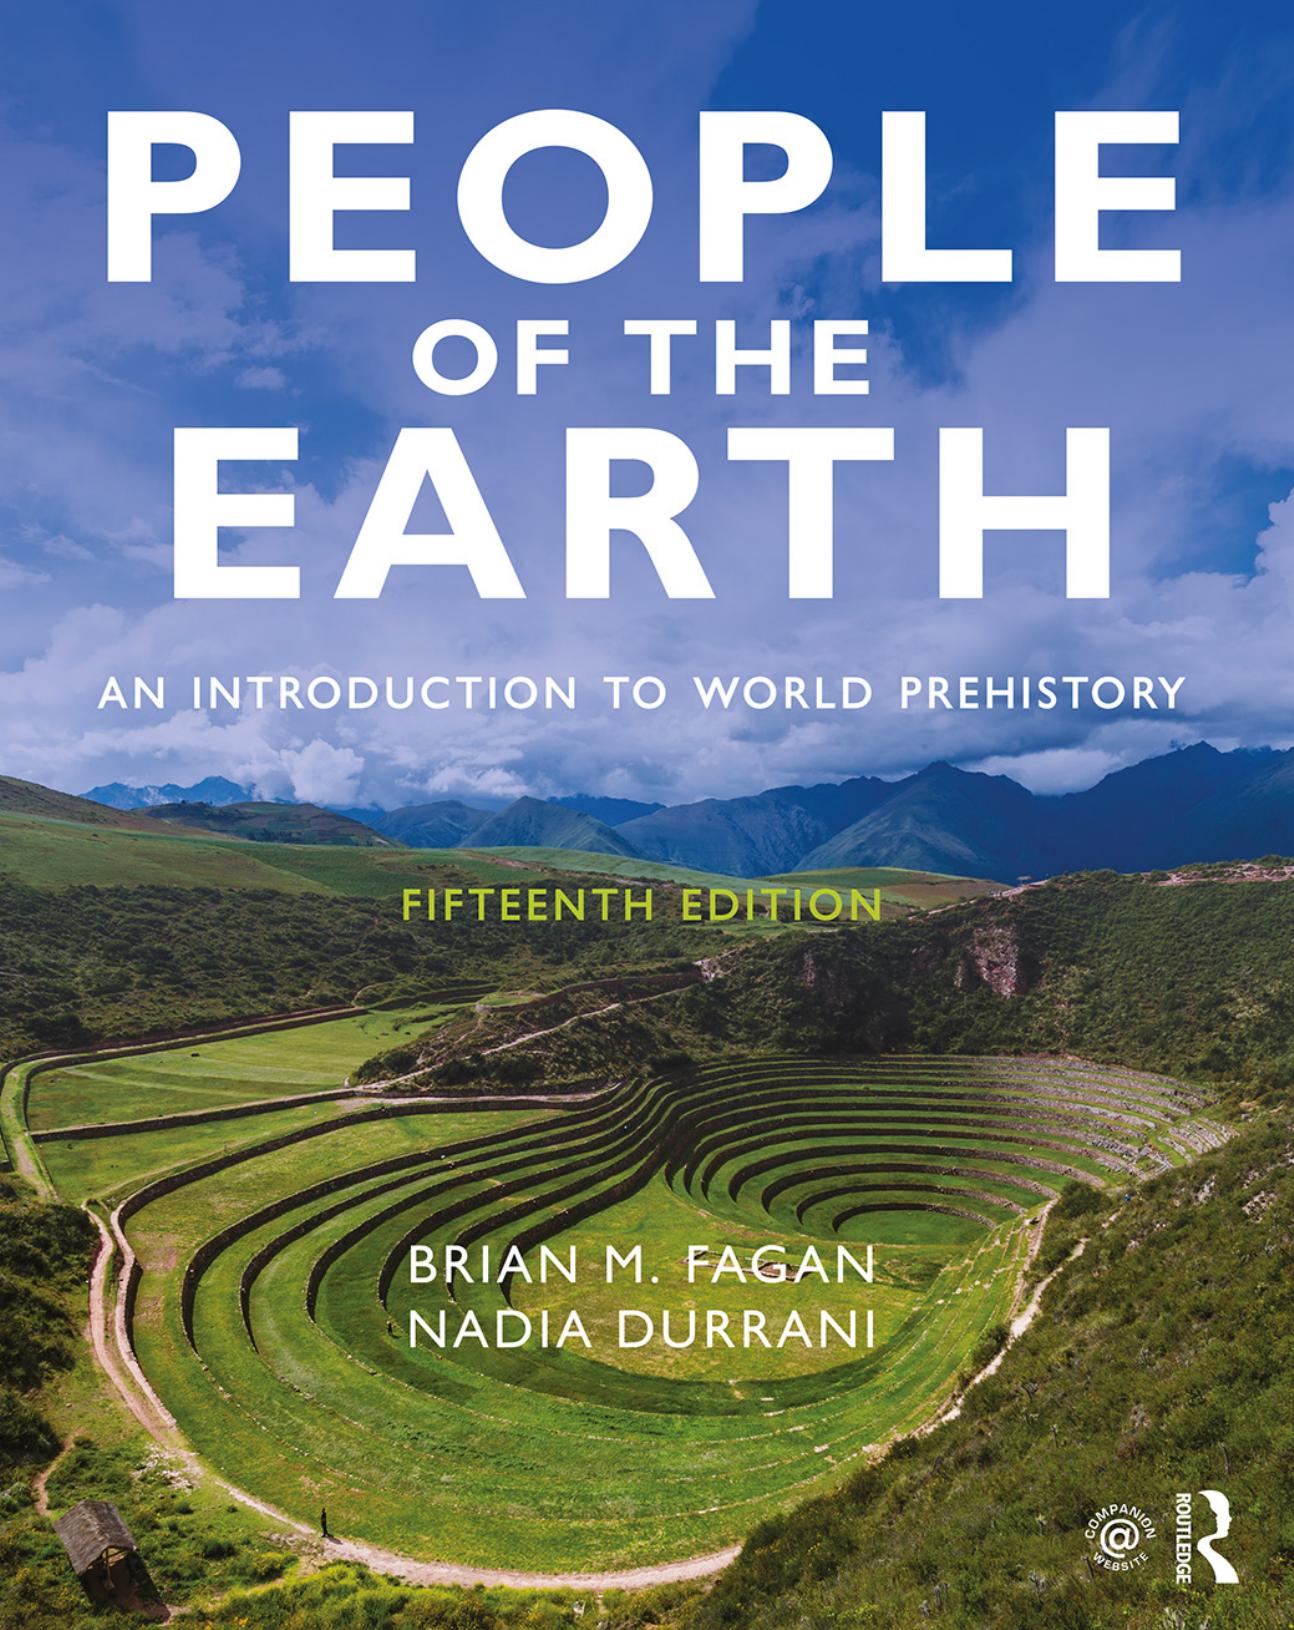 People of the Earth: An Introduction to World Prehistory, 15th edition (2019)